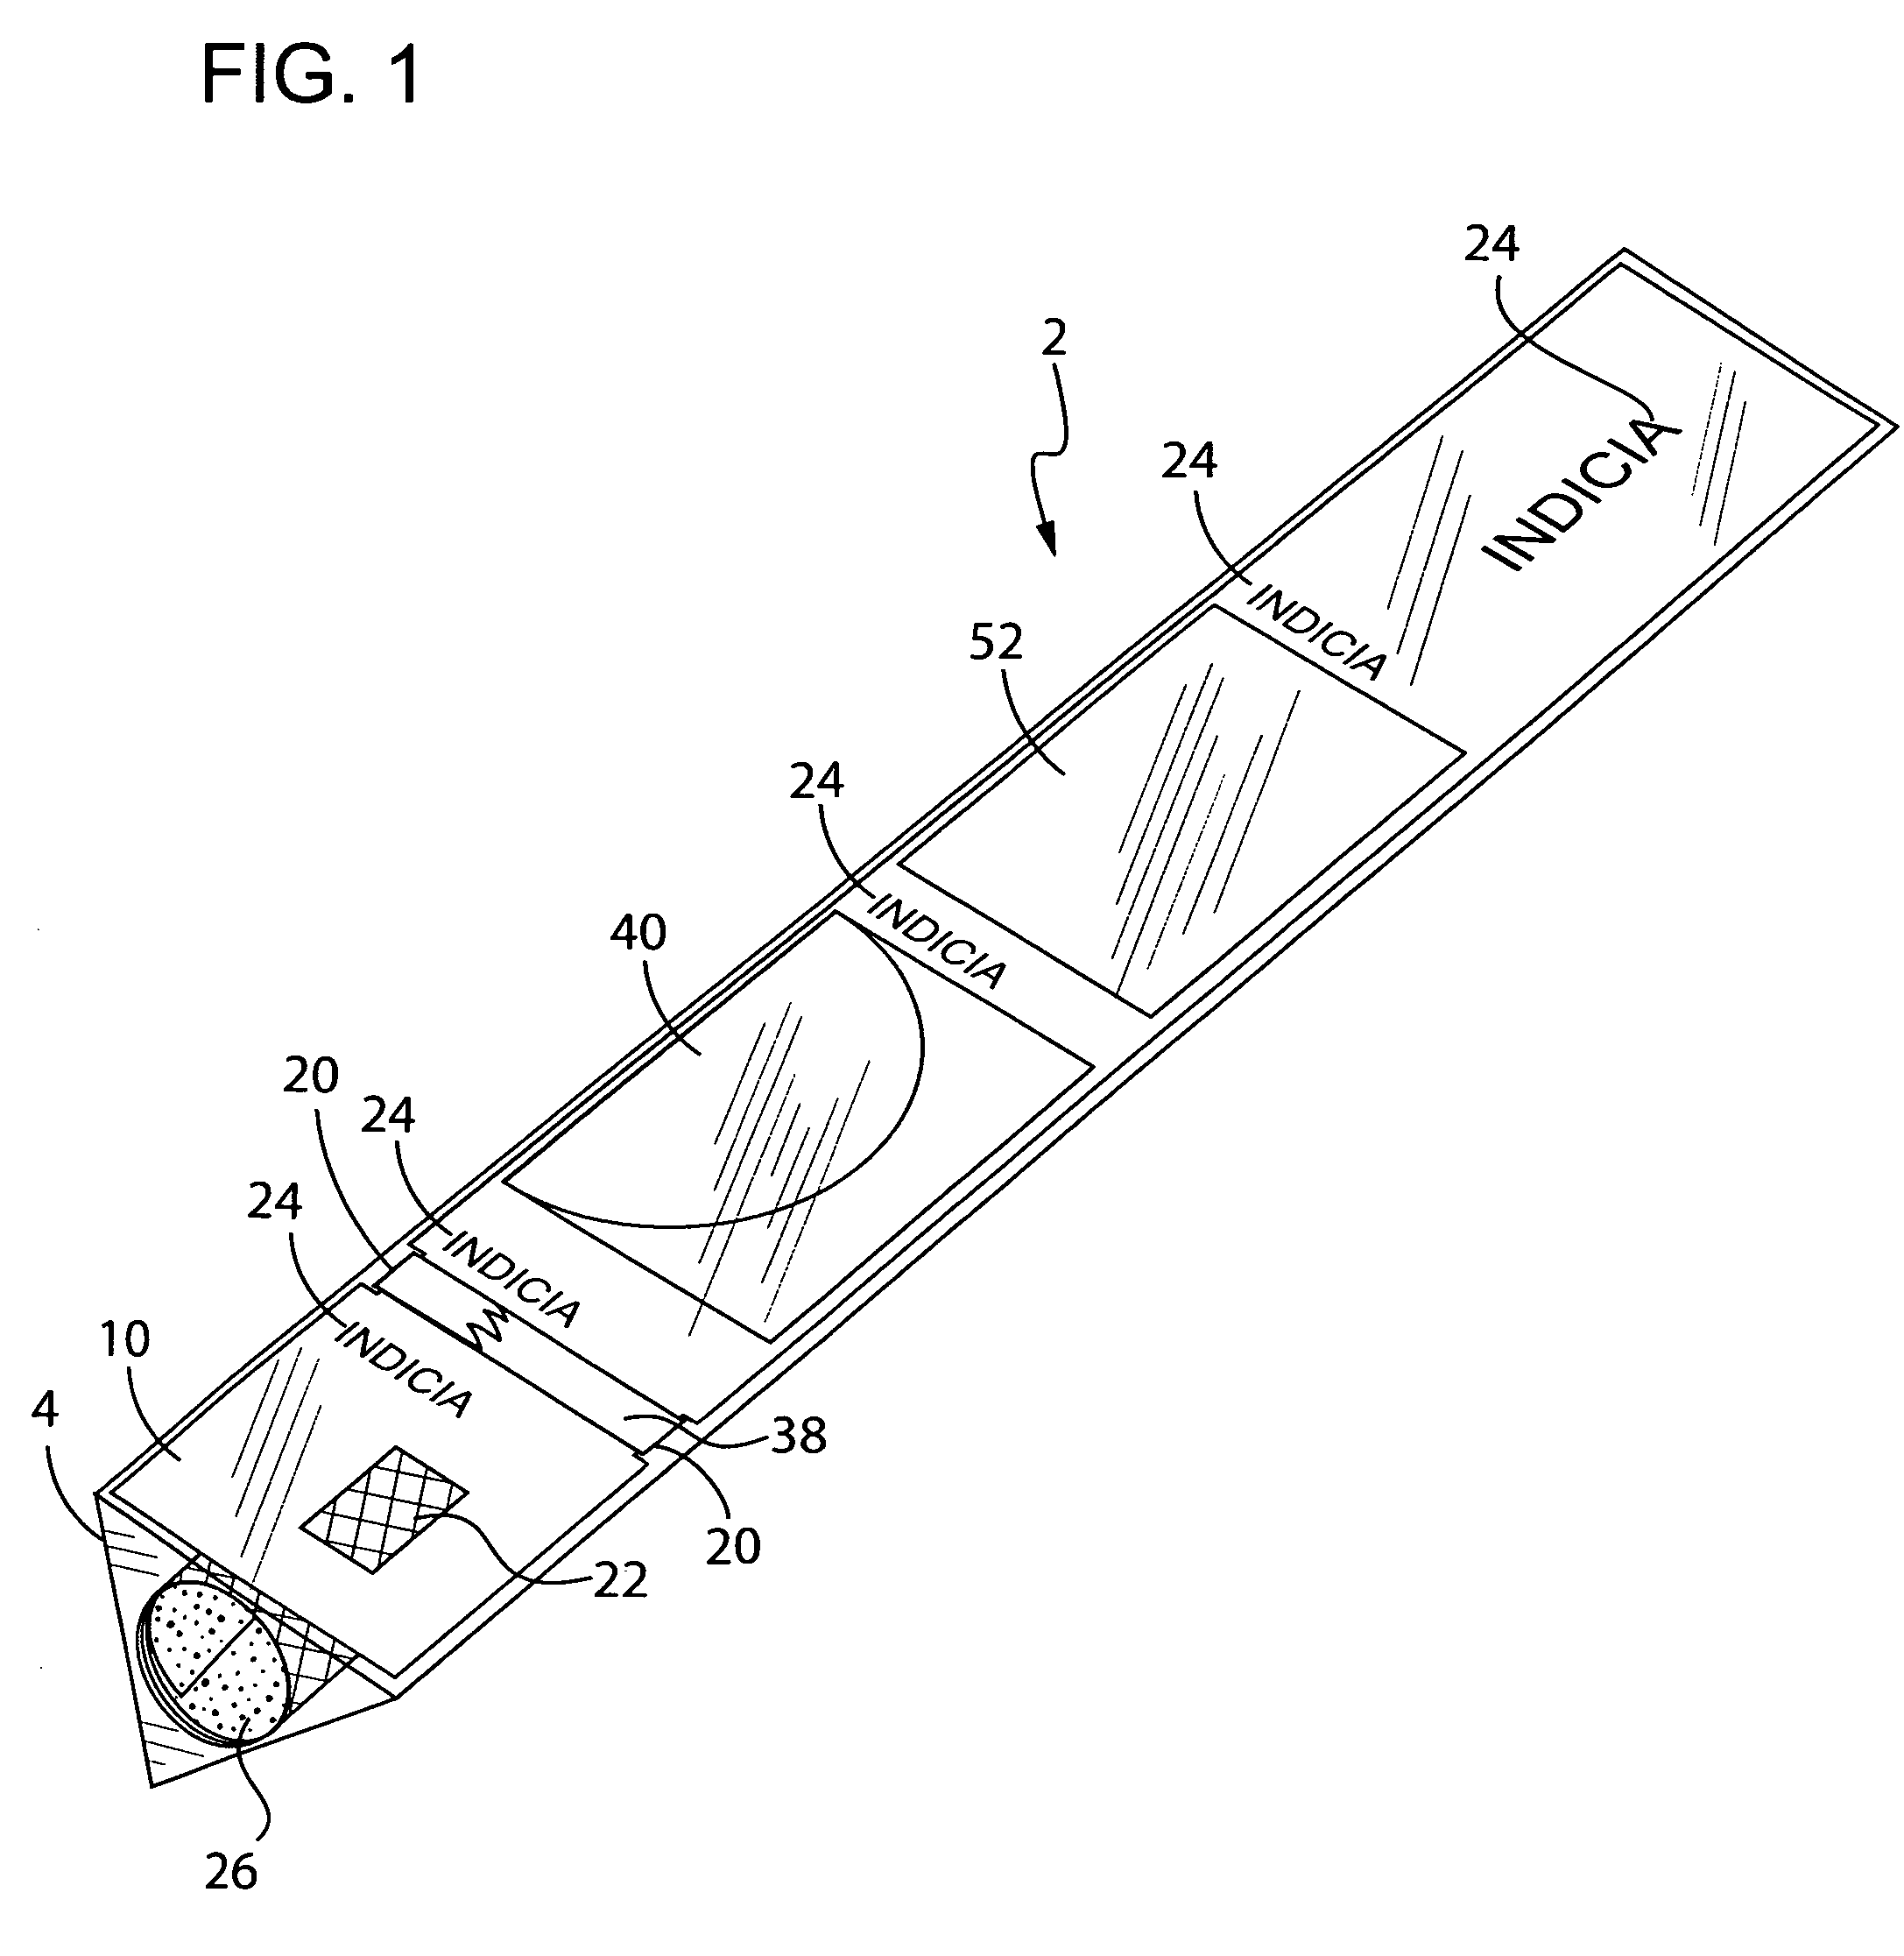 Kit and/or method for storing and/or for displaying gift wrapping and/or accessories